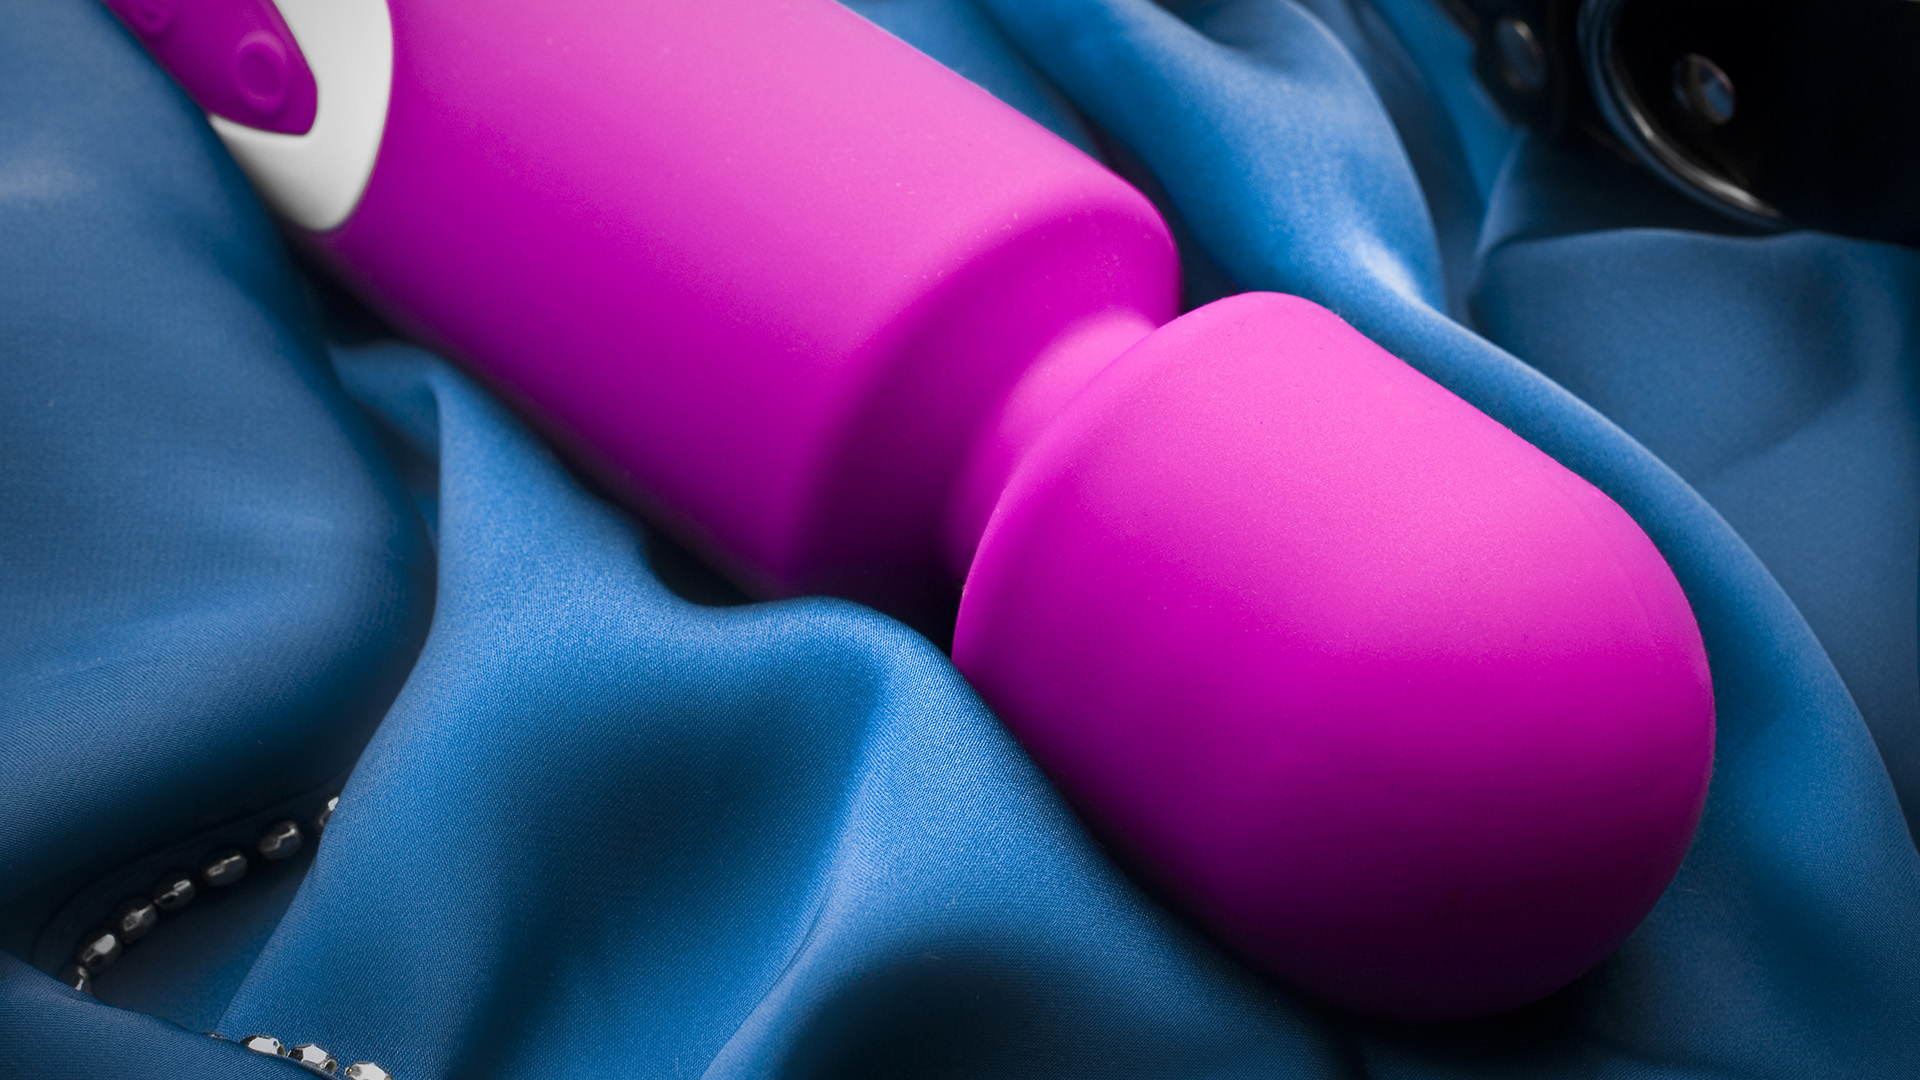 Pink wand vibrator with white border, on blue silky sheets next to chains and chokers.